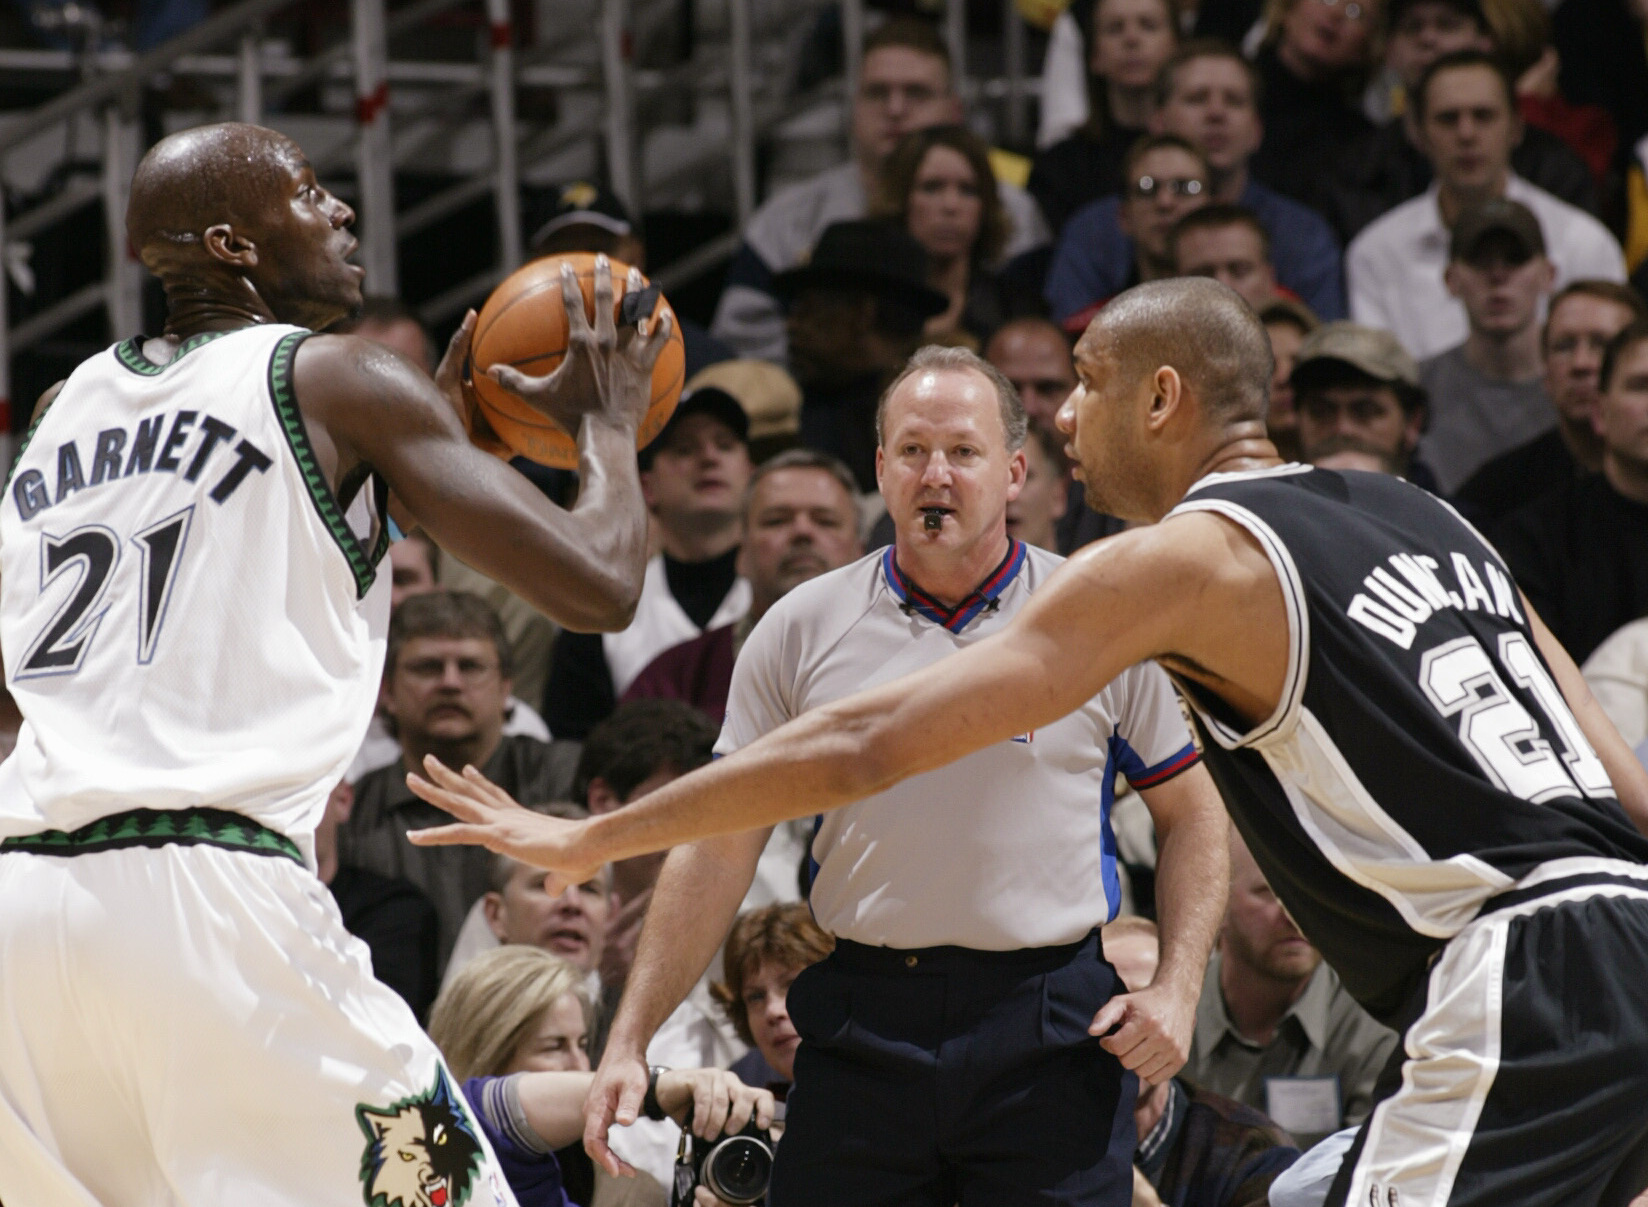 Most iconic NBA numbers: #21 – Kevin Garnett and Tim Duncan